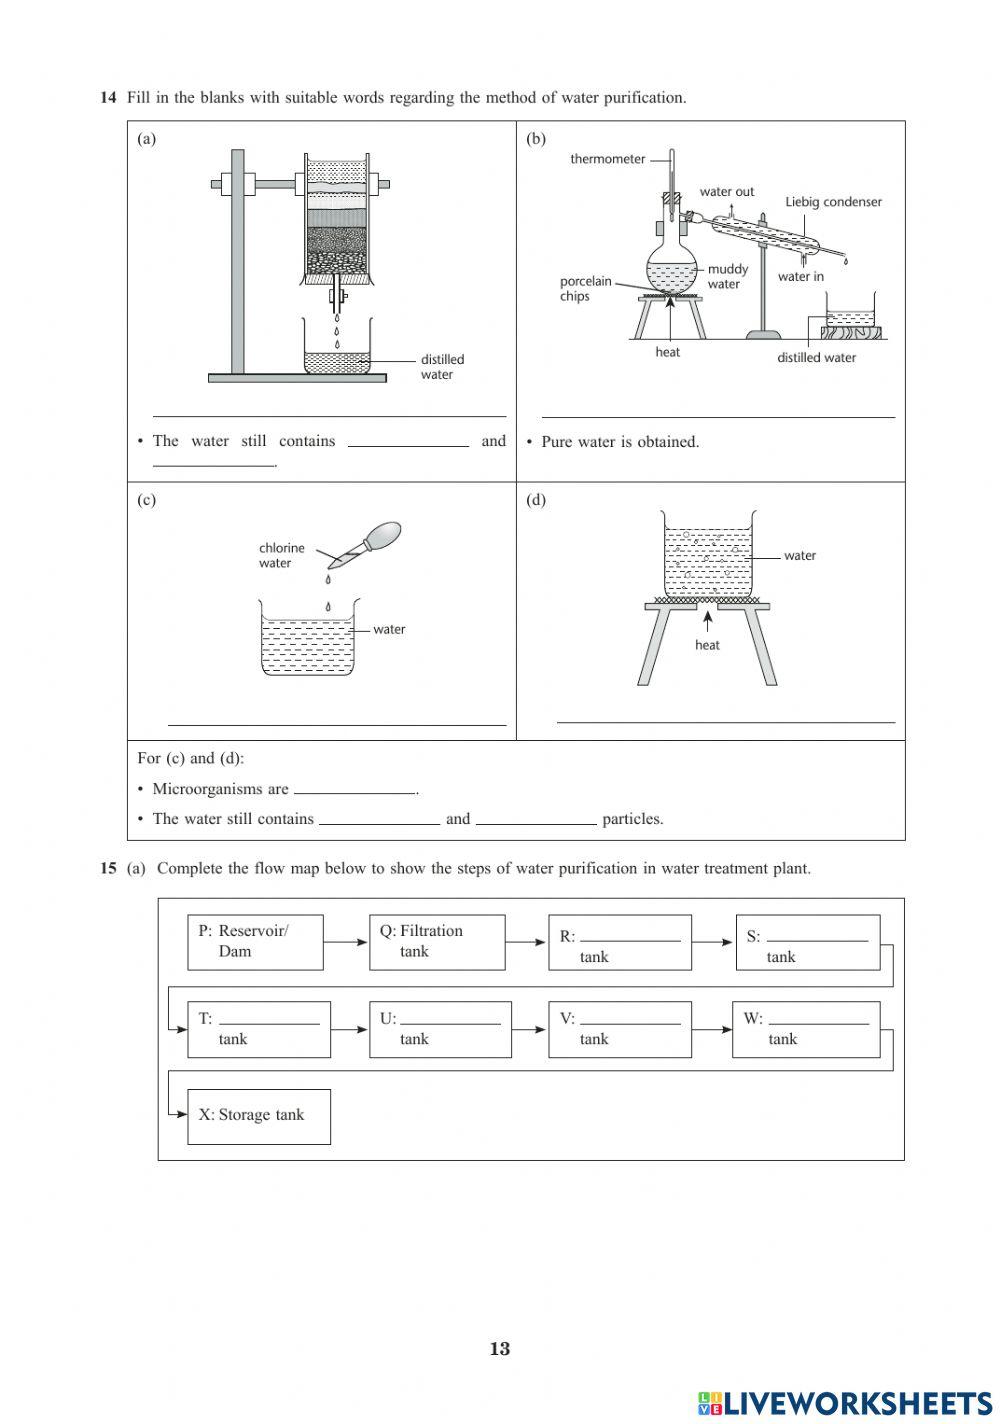 Science form 2 chapter 5